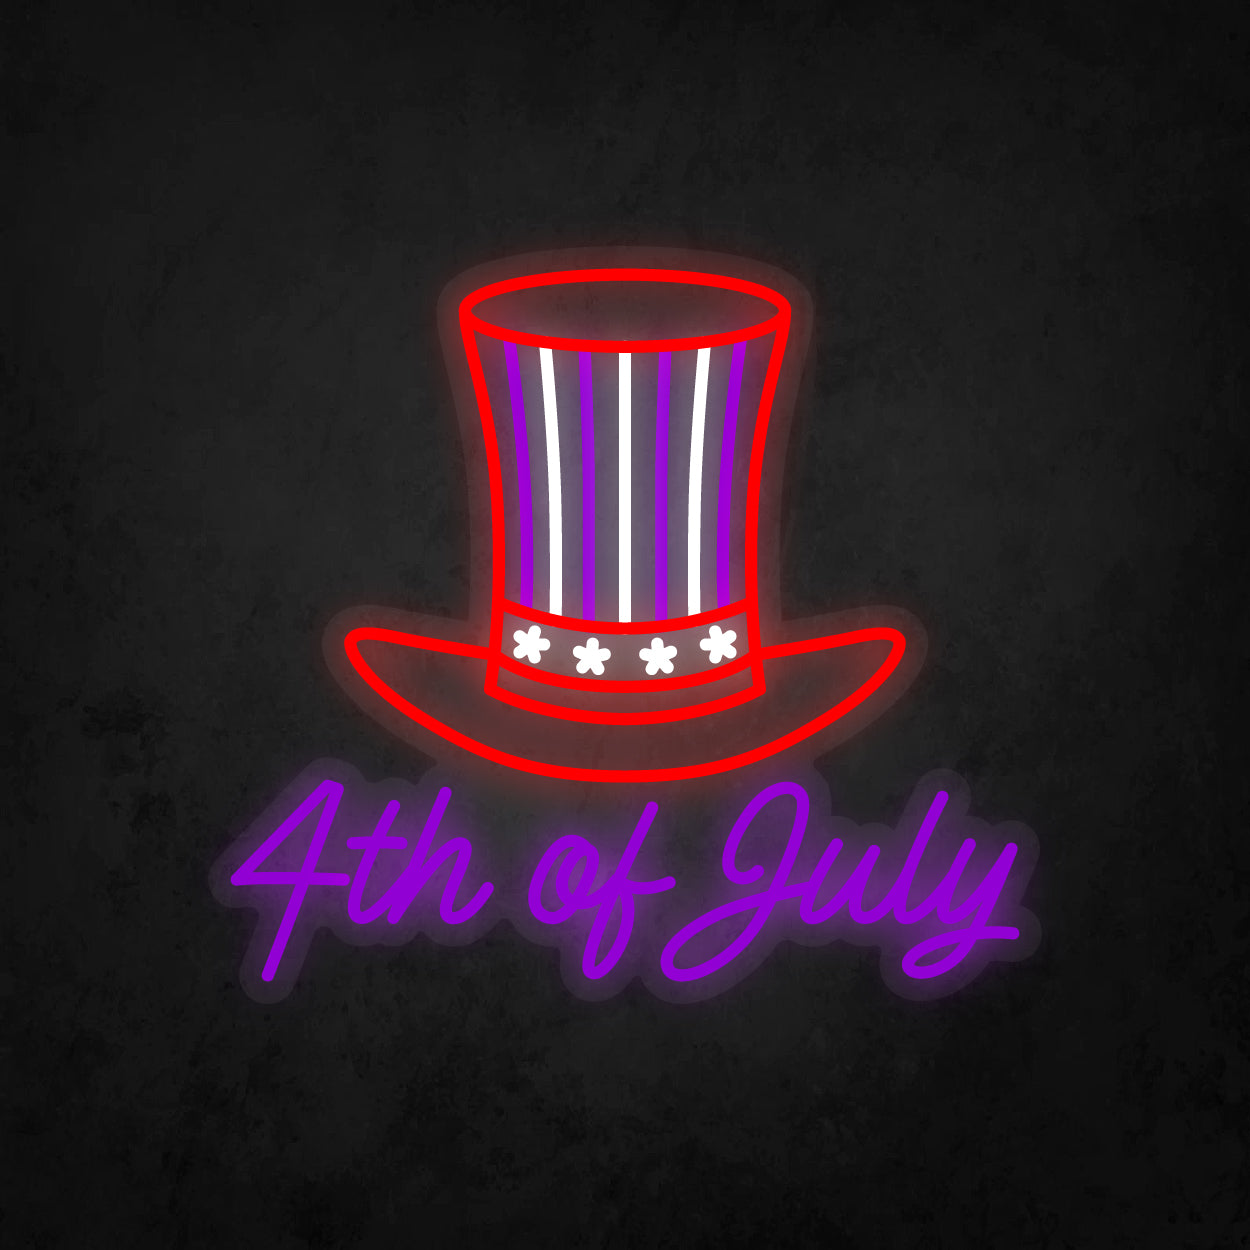 LED Neon Sign - 4th of July and Hat